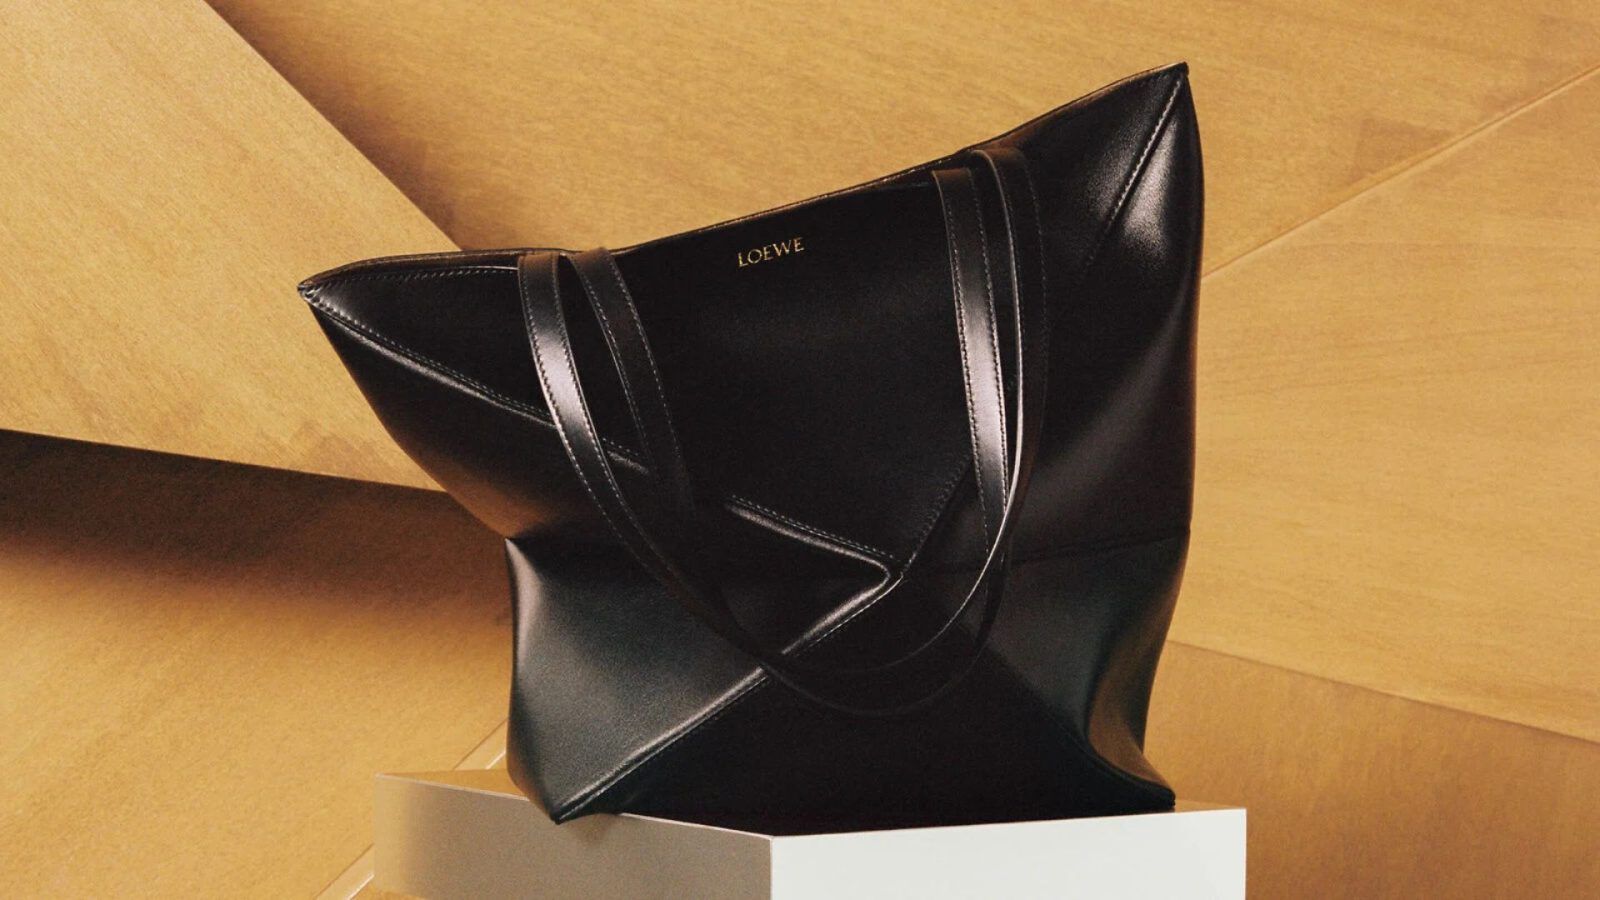 Loewe Is Officially The Number 1 Brand Of The Moment - Here's Why